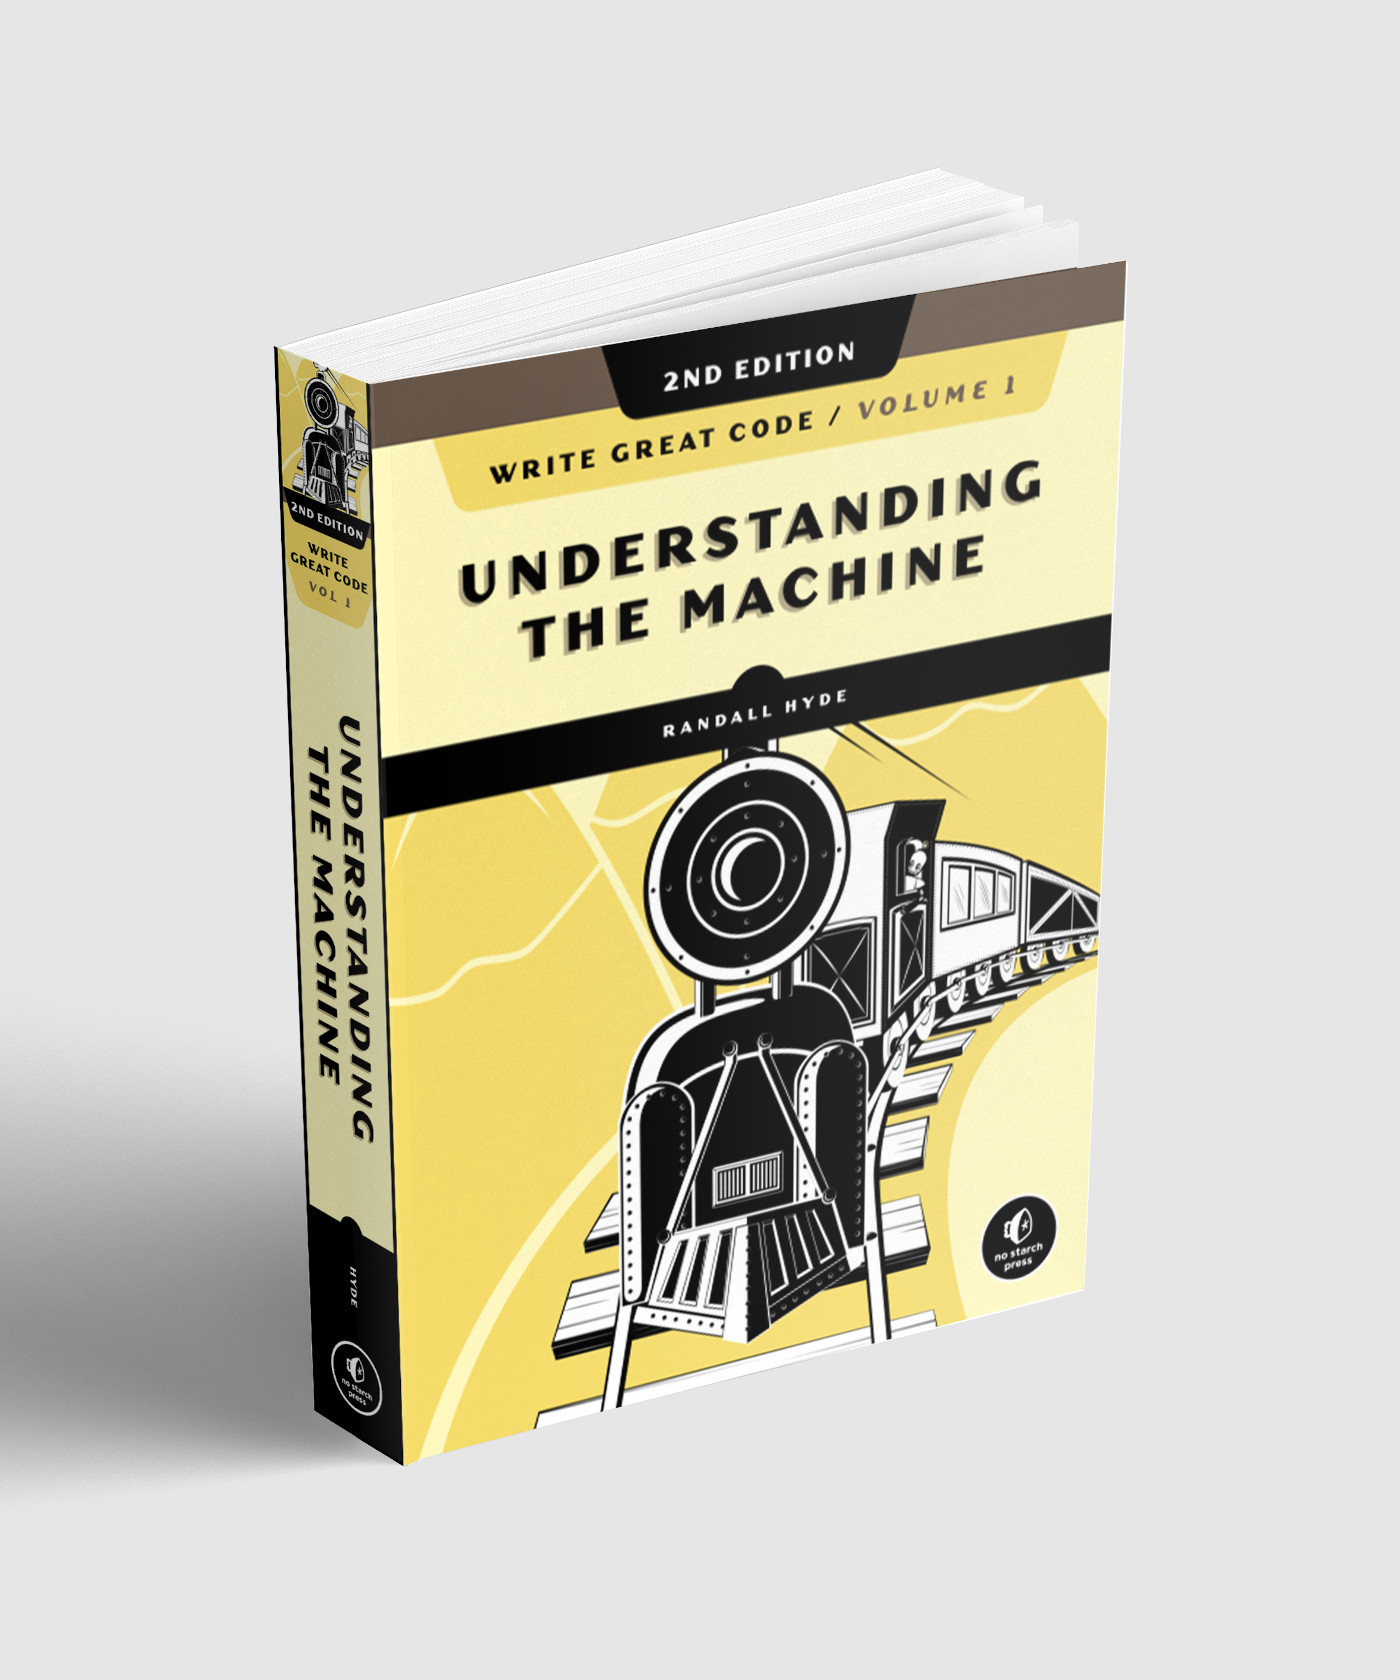 *Understanding the Machine* by Randall Hyde